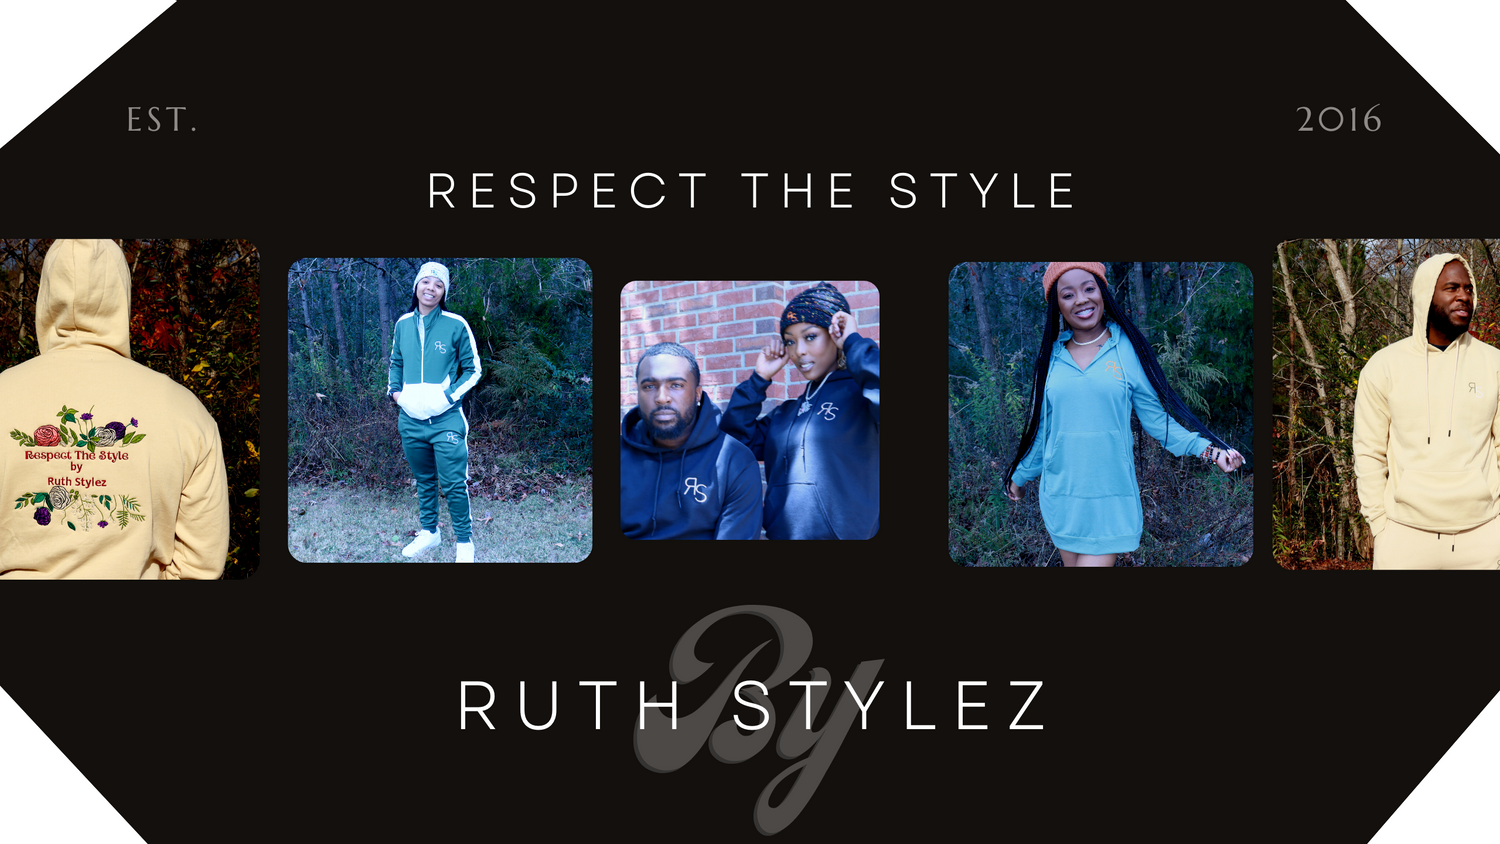 Respect The Style by Ruth Stylez